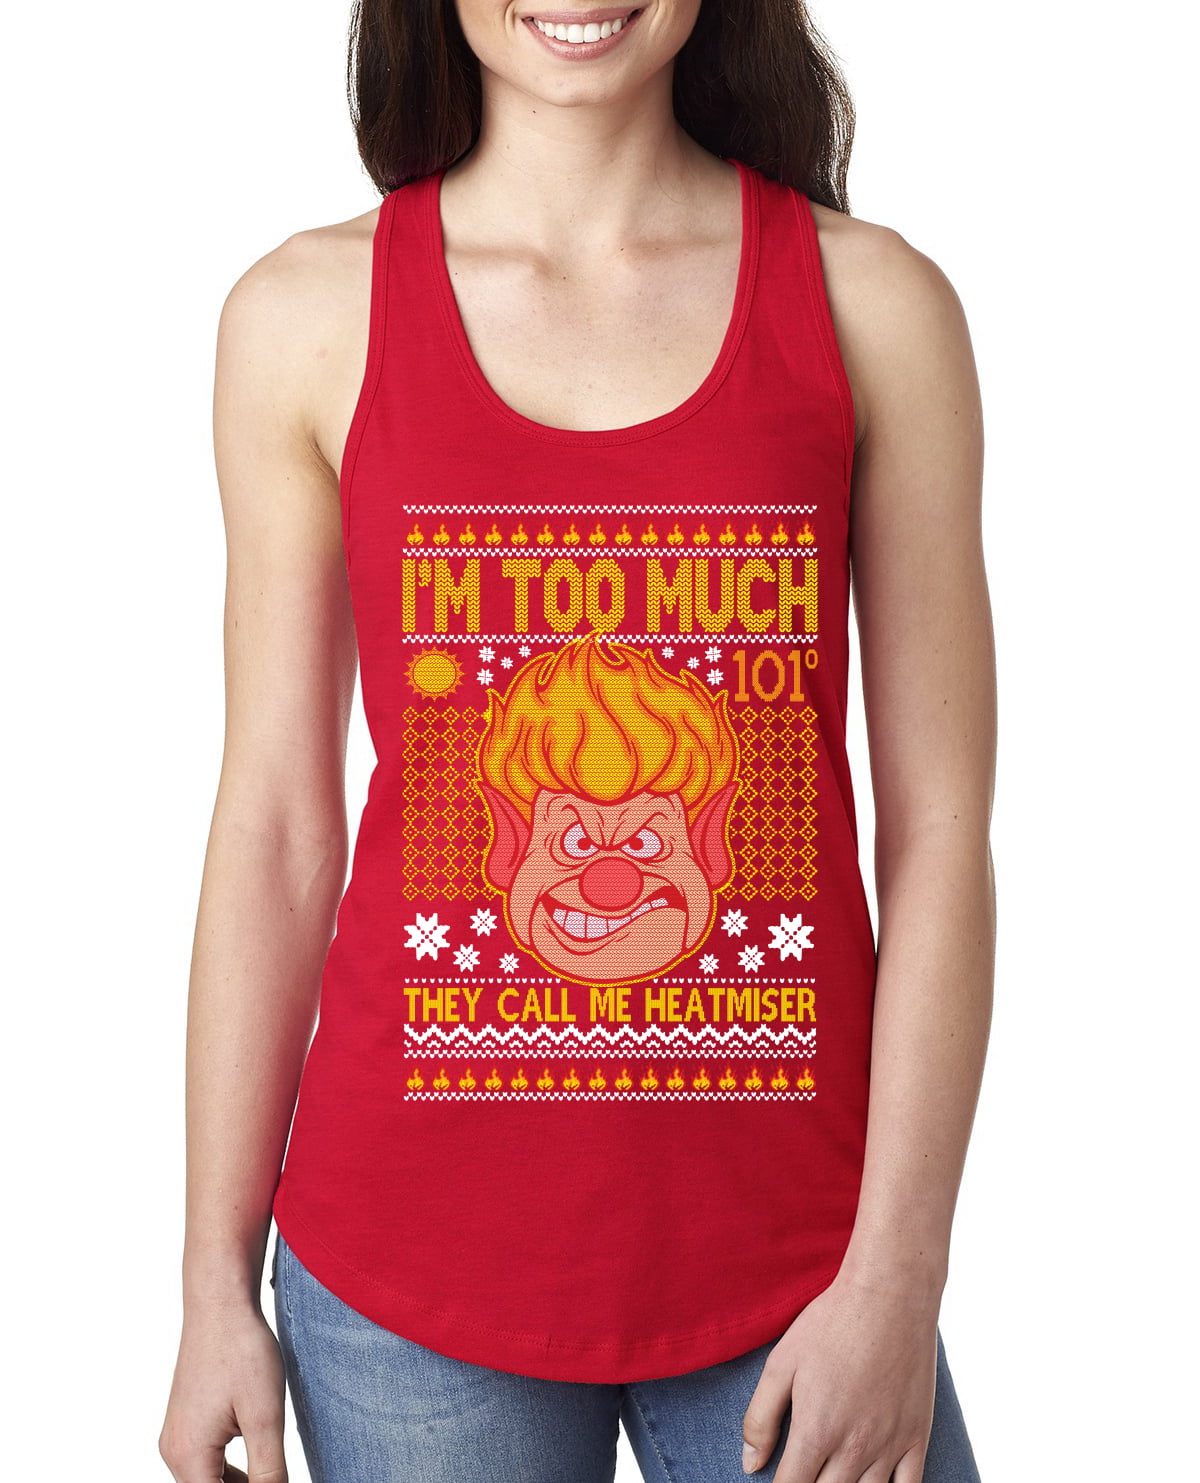 Wild Bobby They Call Me Heatmeiser I'm Too Much Ugly Christmas Sweater Women  Racerback Tank Top, Red, Large 